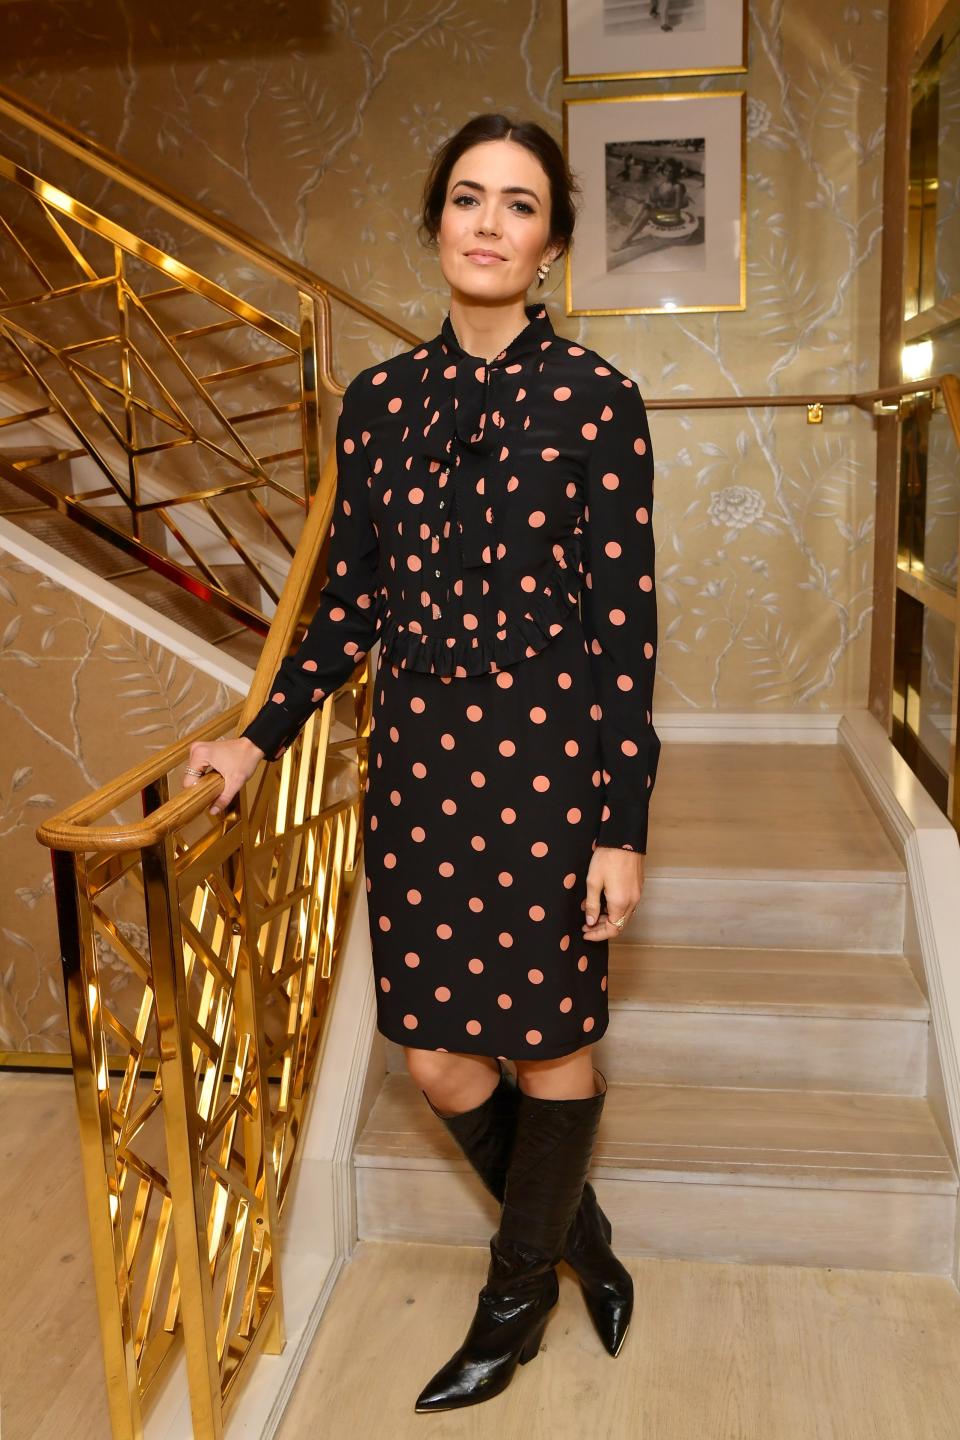 Mandy Moore is wearing the Resort 2020 Printed Ruffle Bow Dress and Lila Knee Boot.